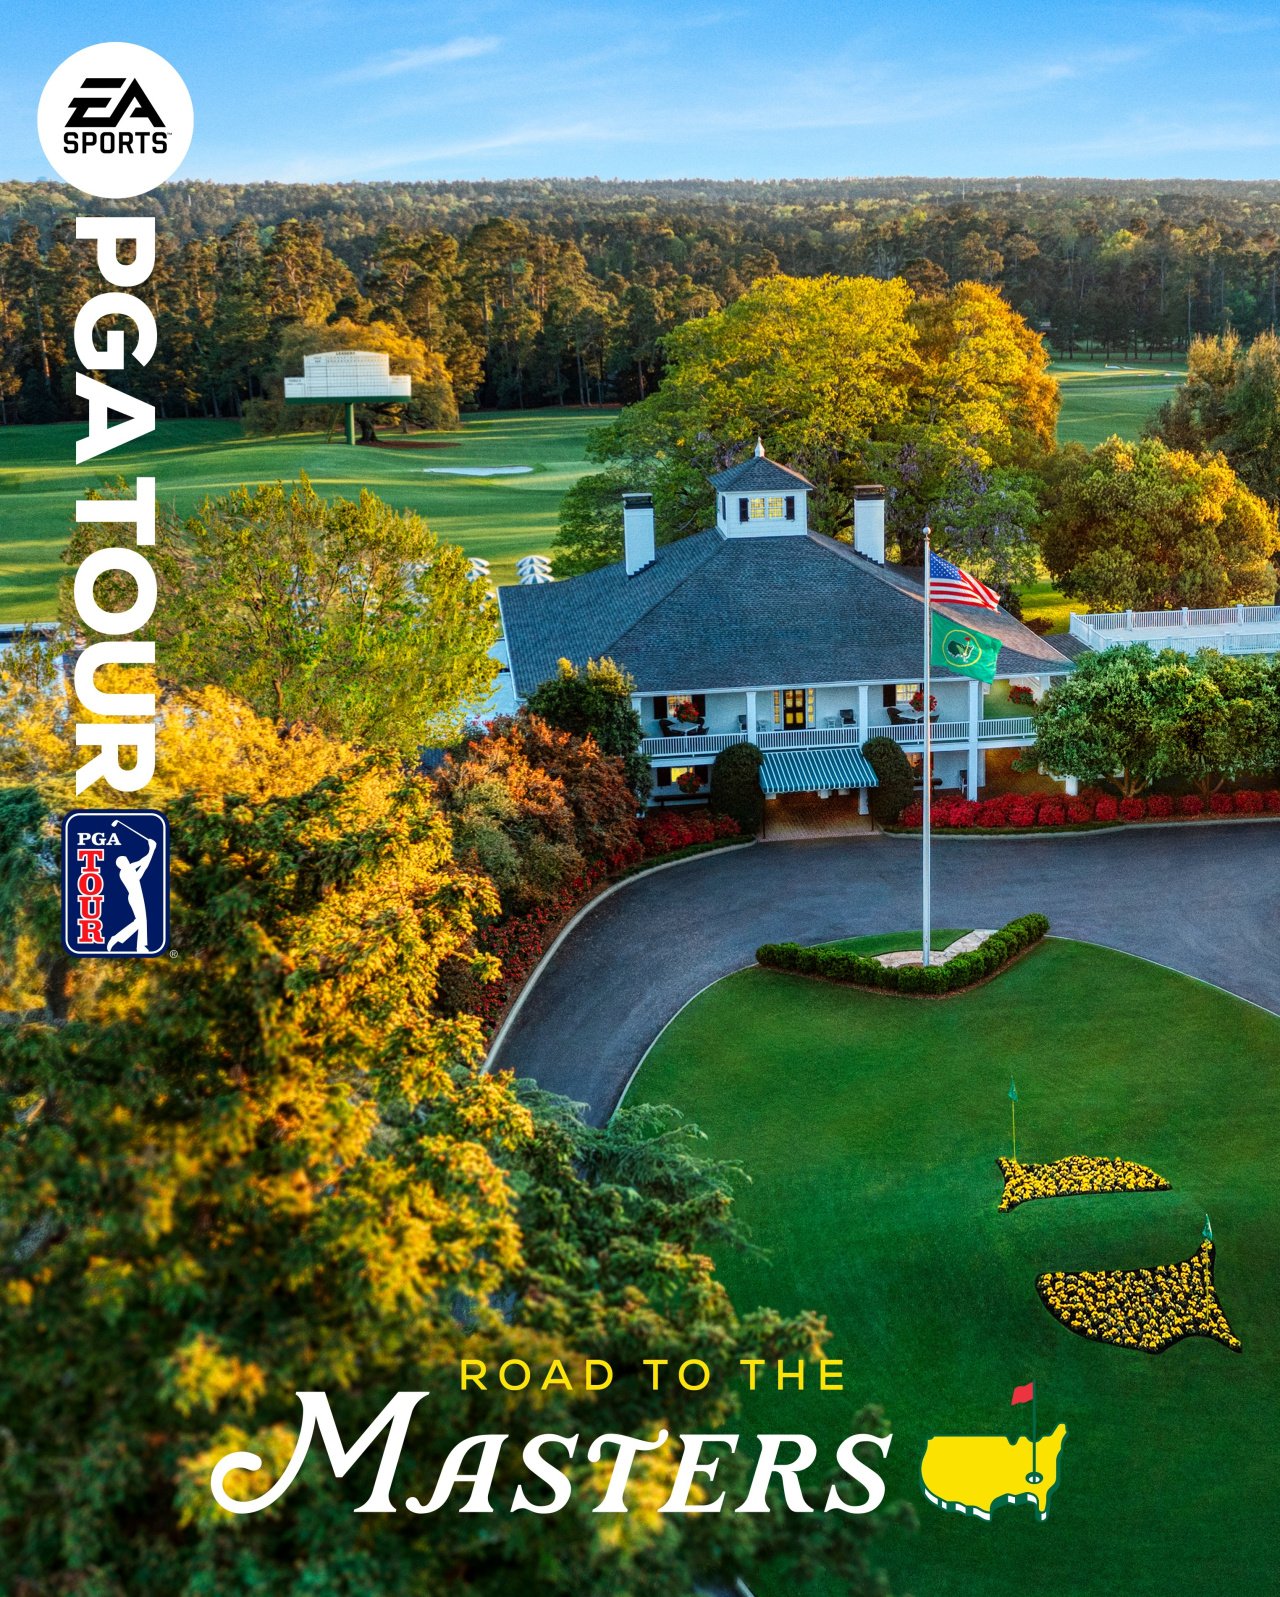 pga tour masters game release date